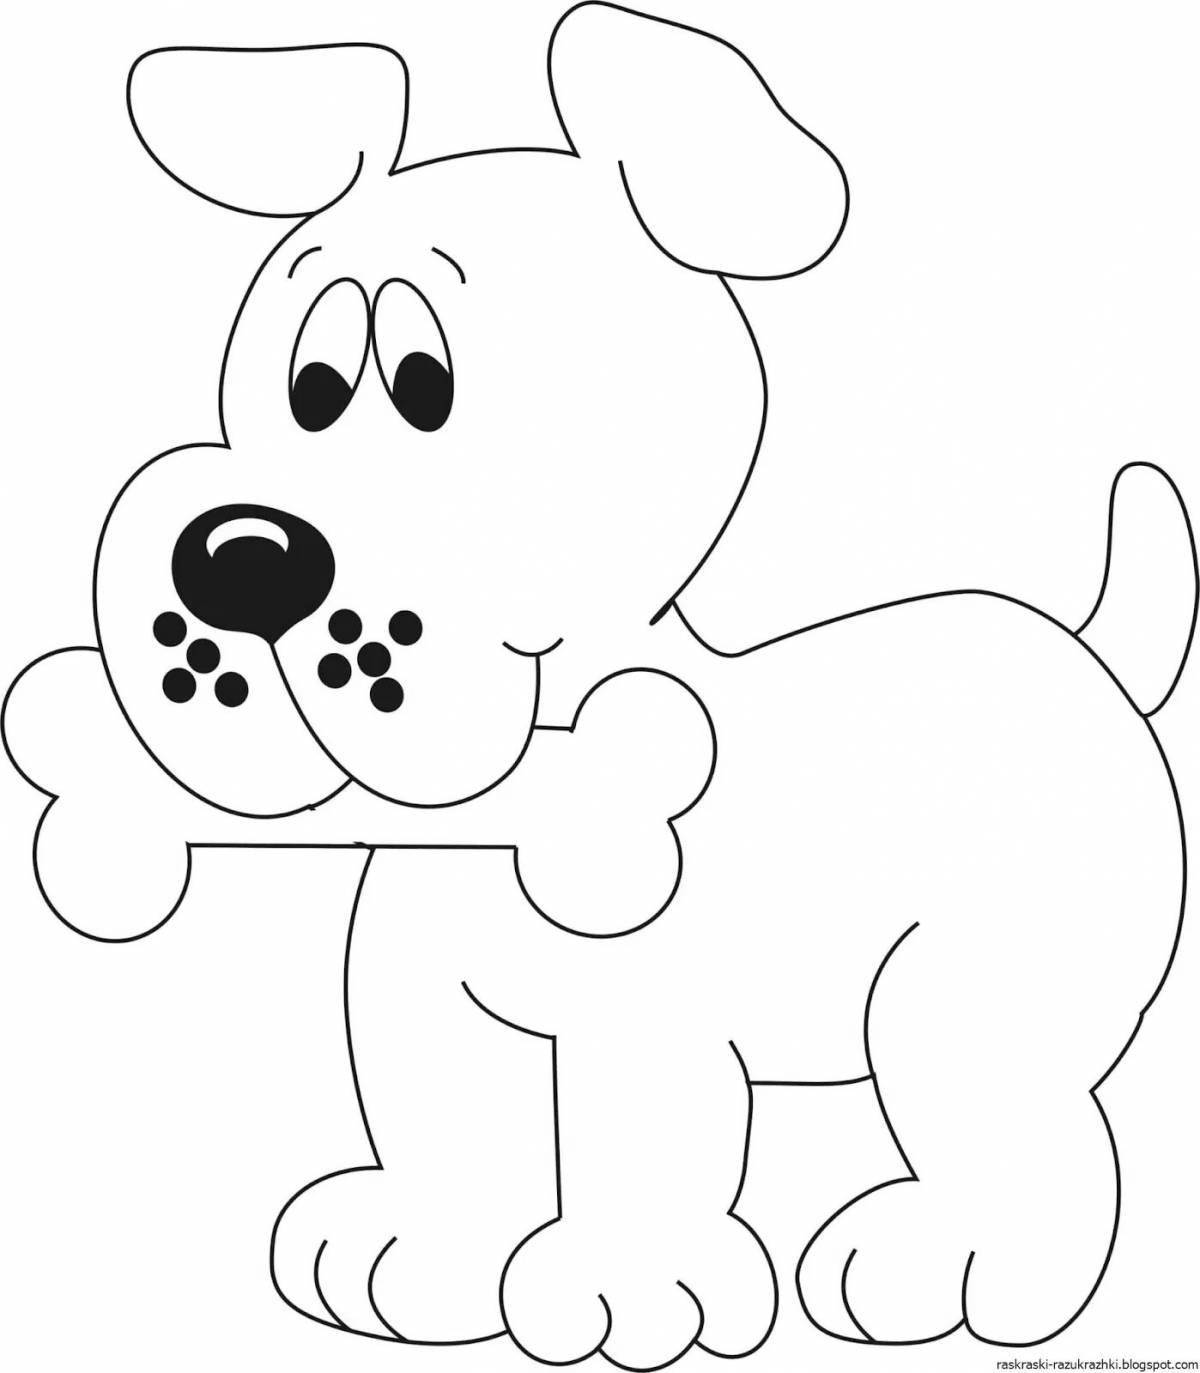 Amazing dog coloring book for kids